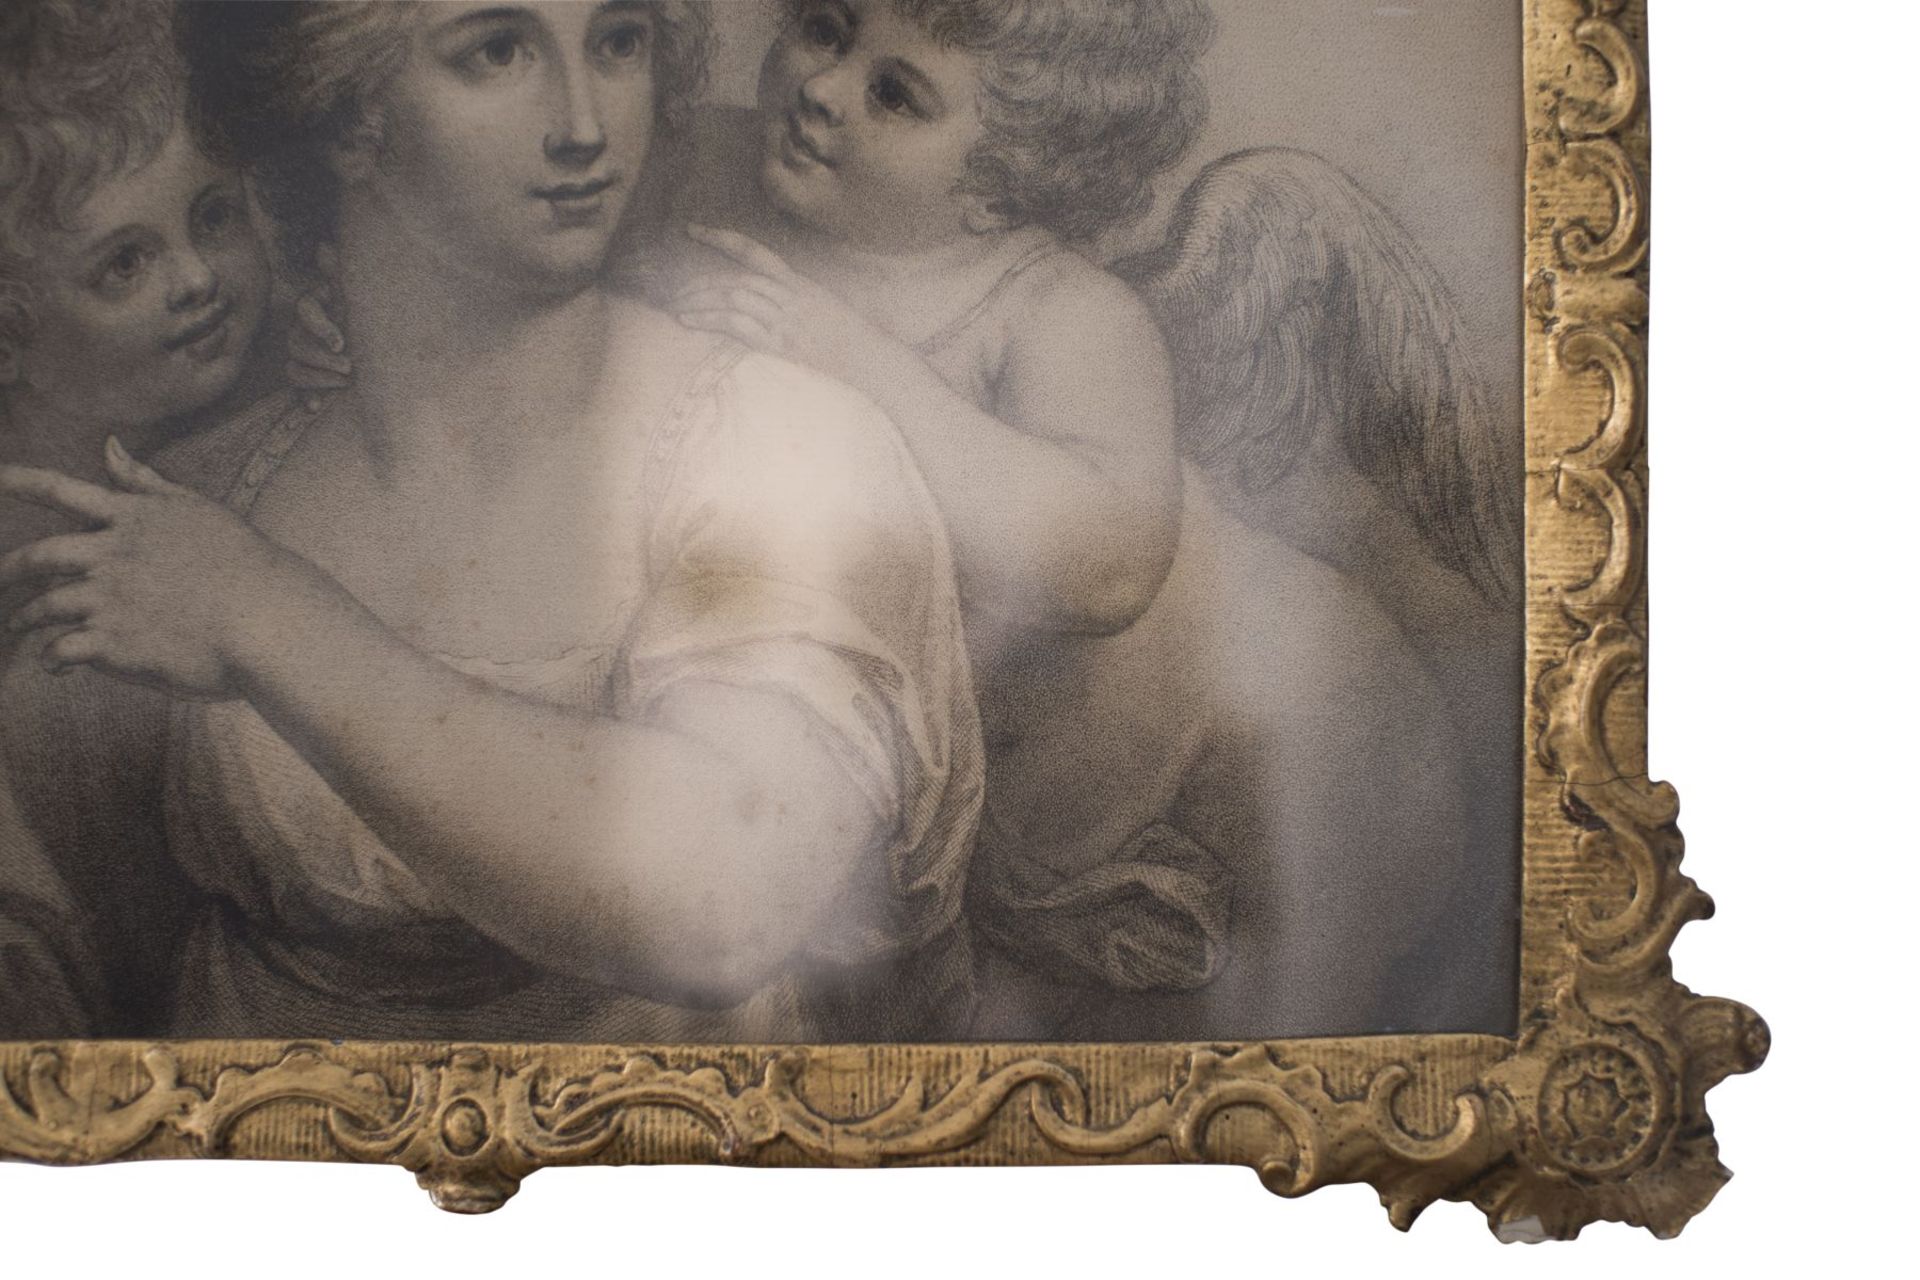 Artist of the 18th century "Lady with two lovers" - Image 3 of 5